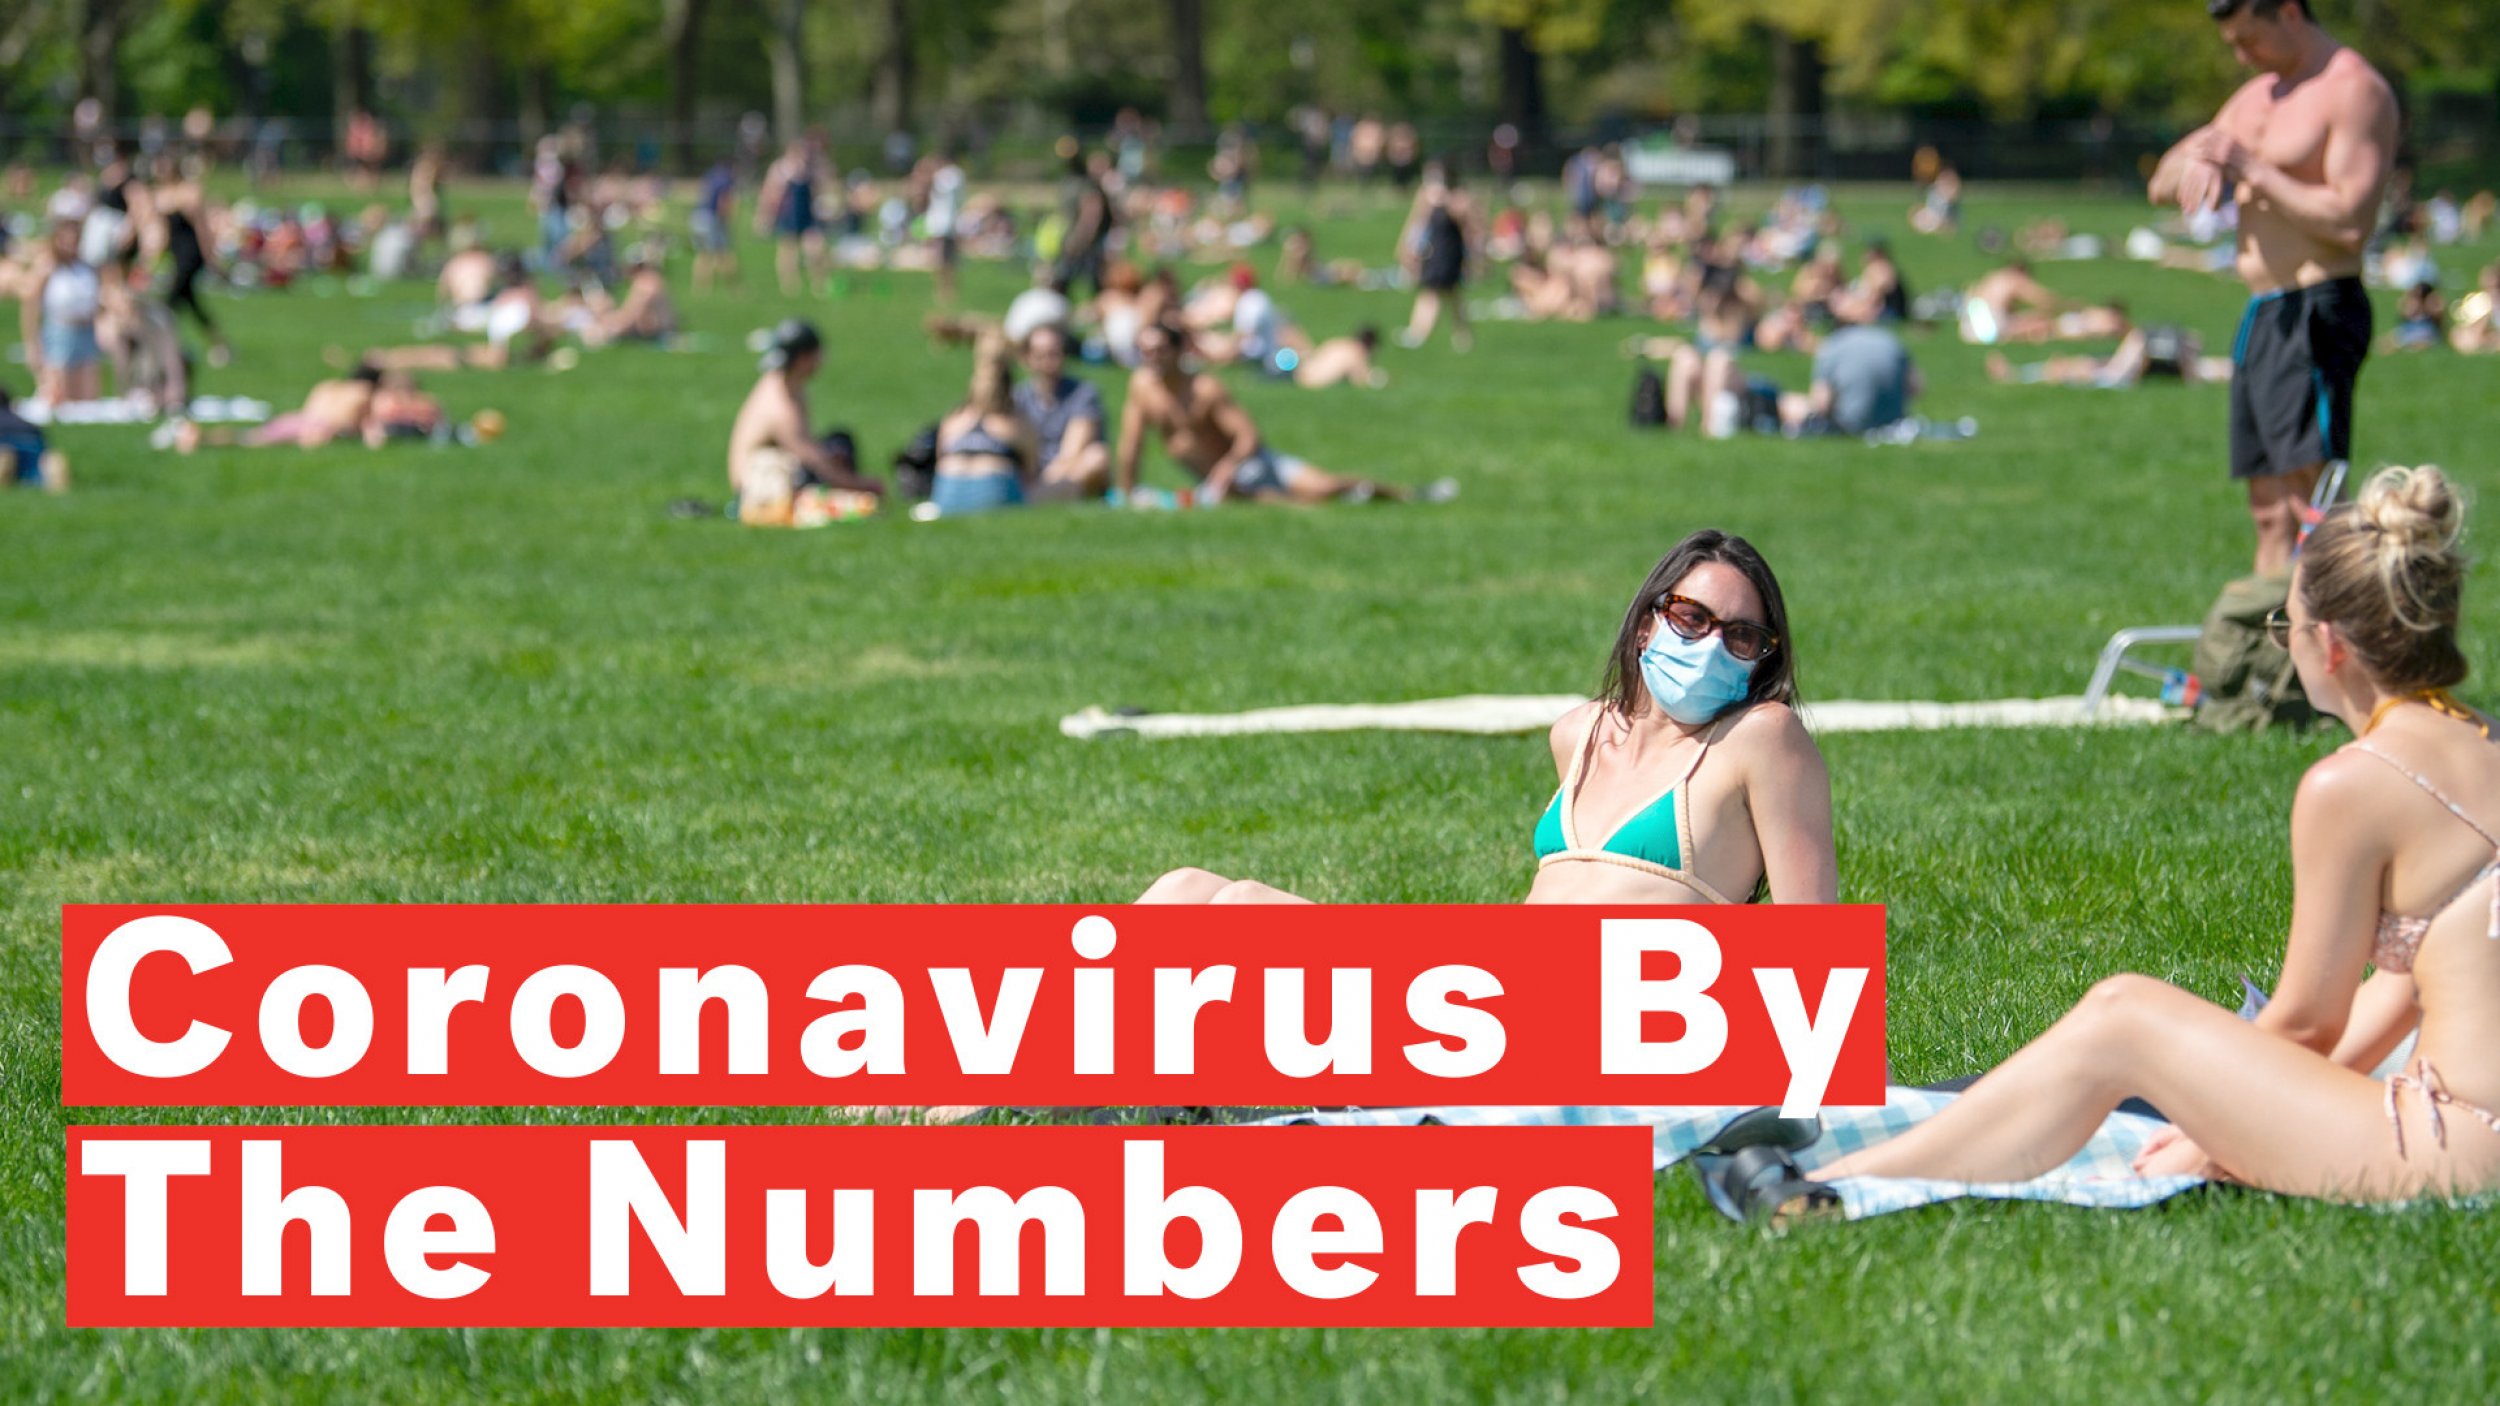 Coronavirus By the Numbers U.S. States Reopen As COVID-19 Cases Reach 4.4 Million Worldwide